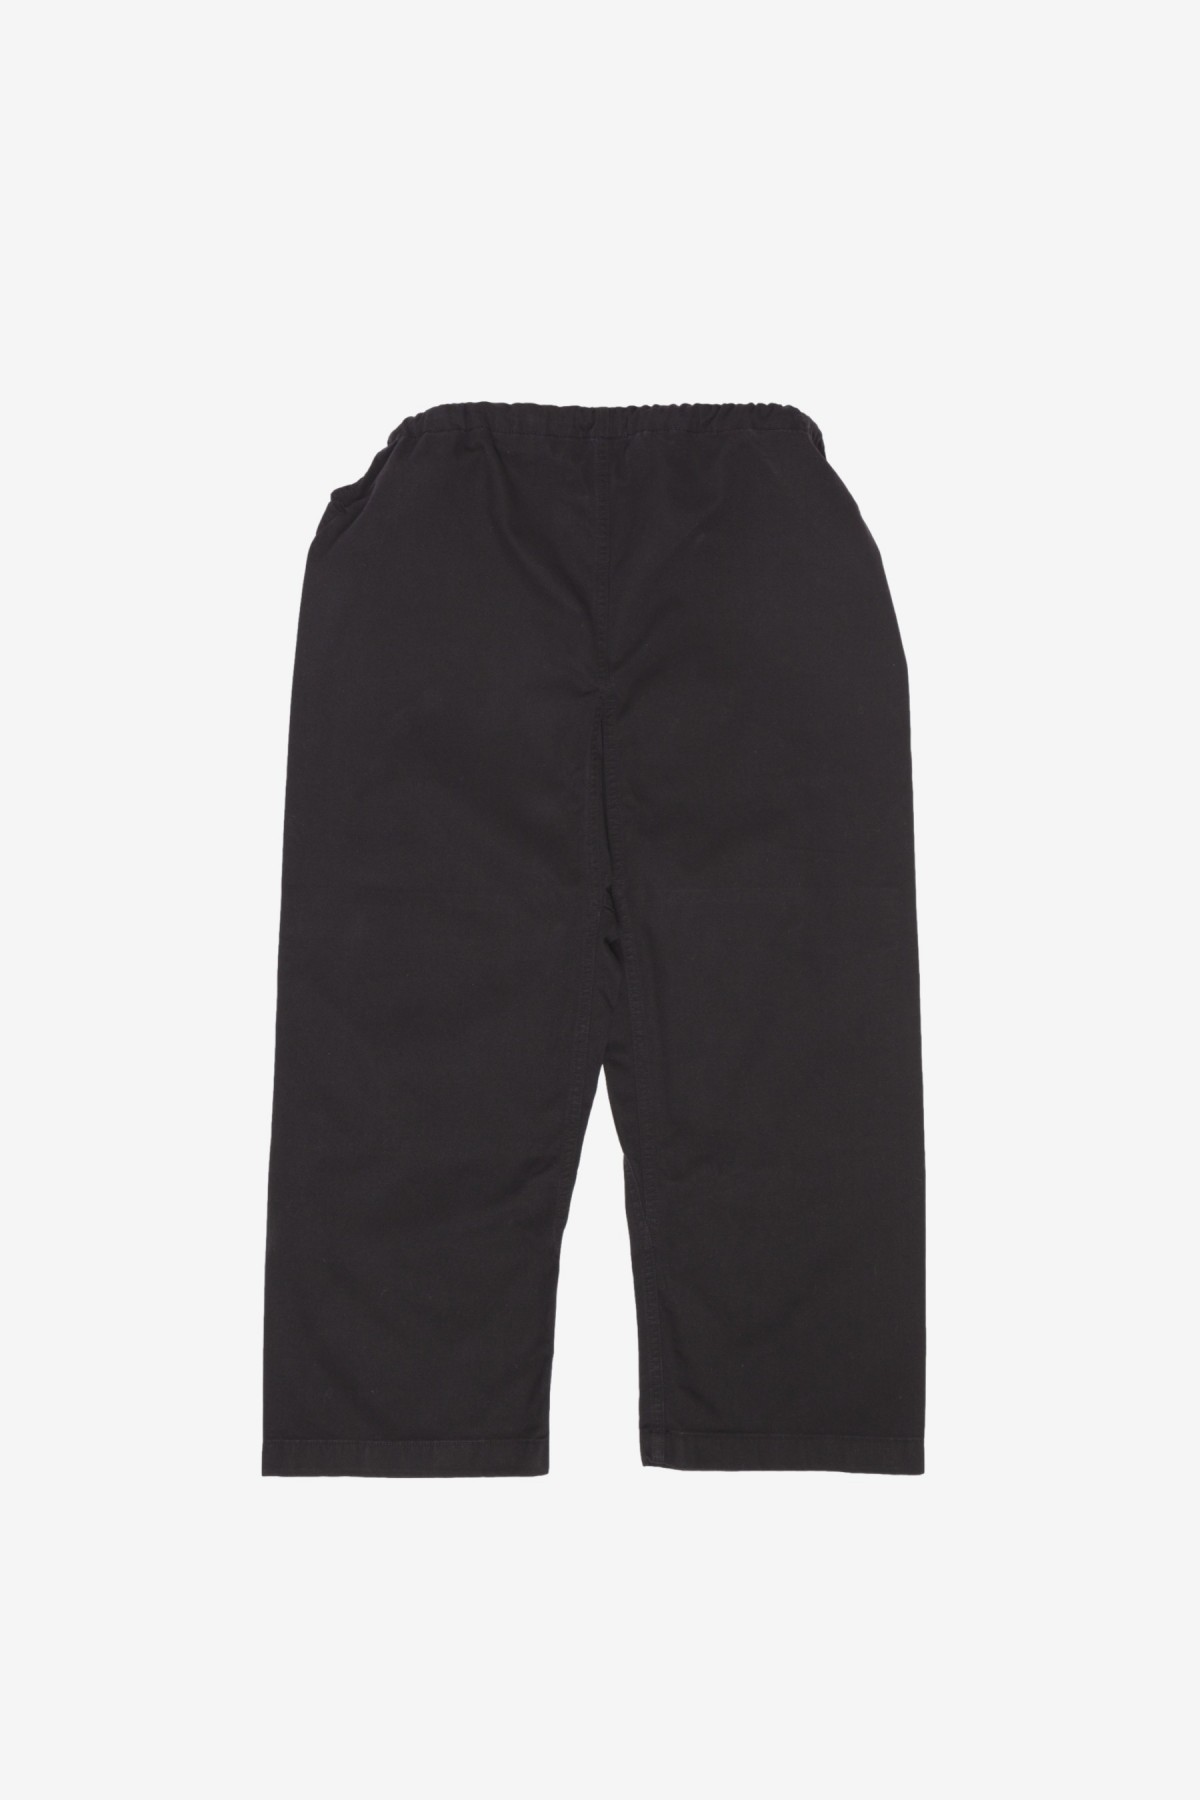 Gil Rodriguez The Lou Pant in Black